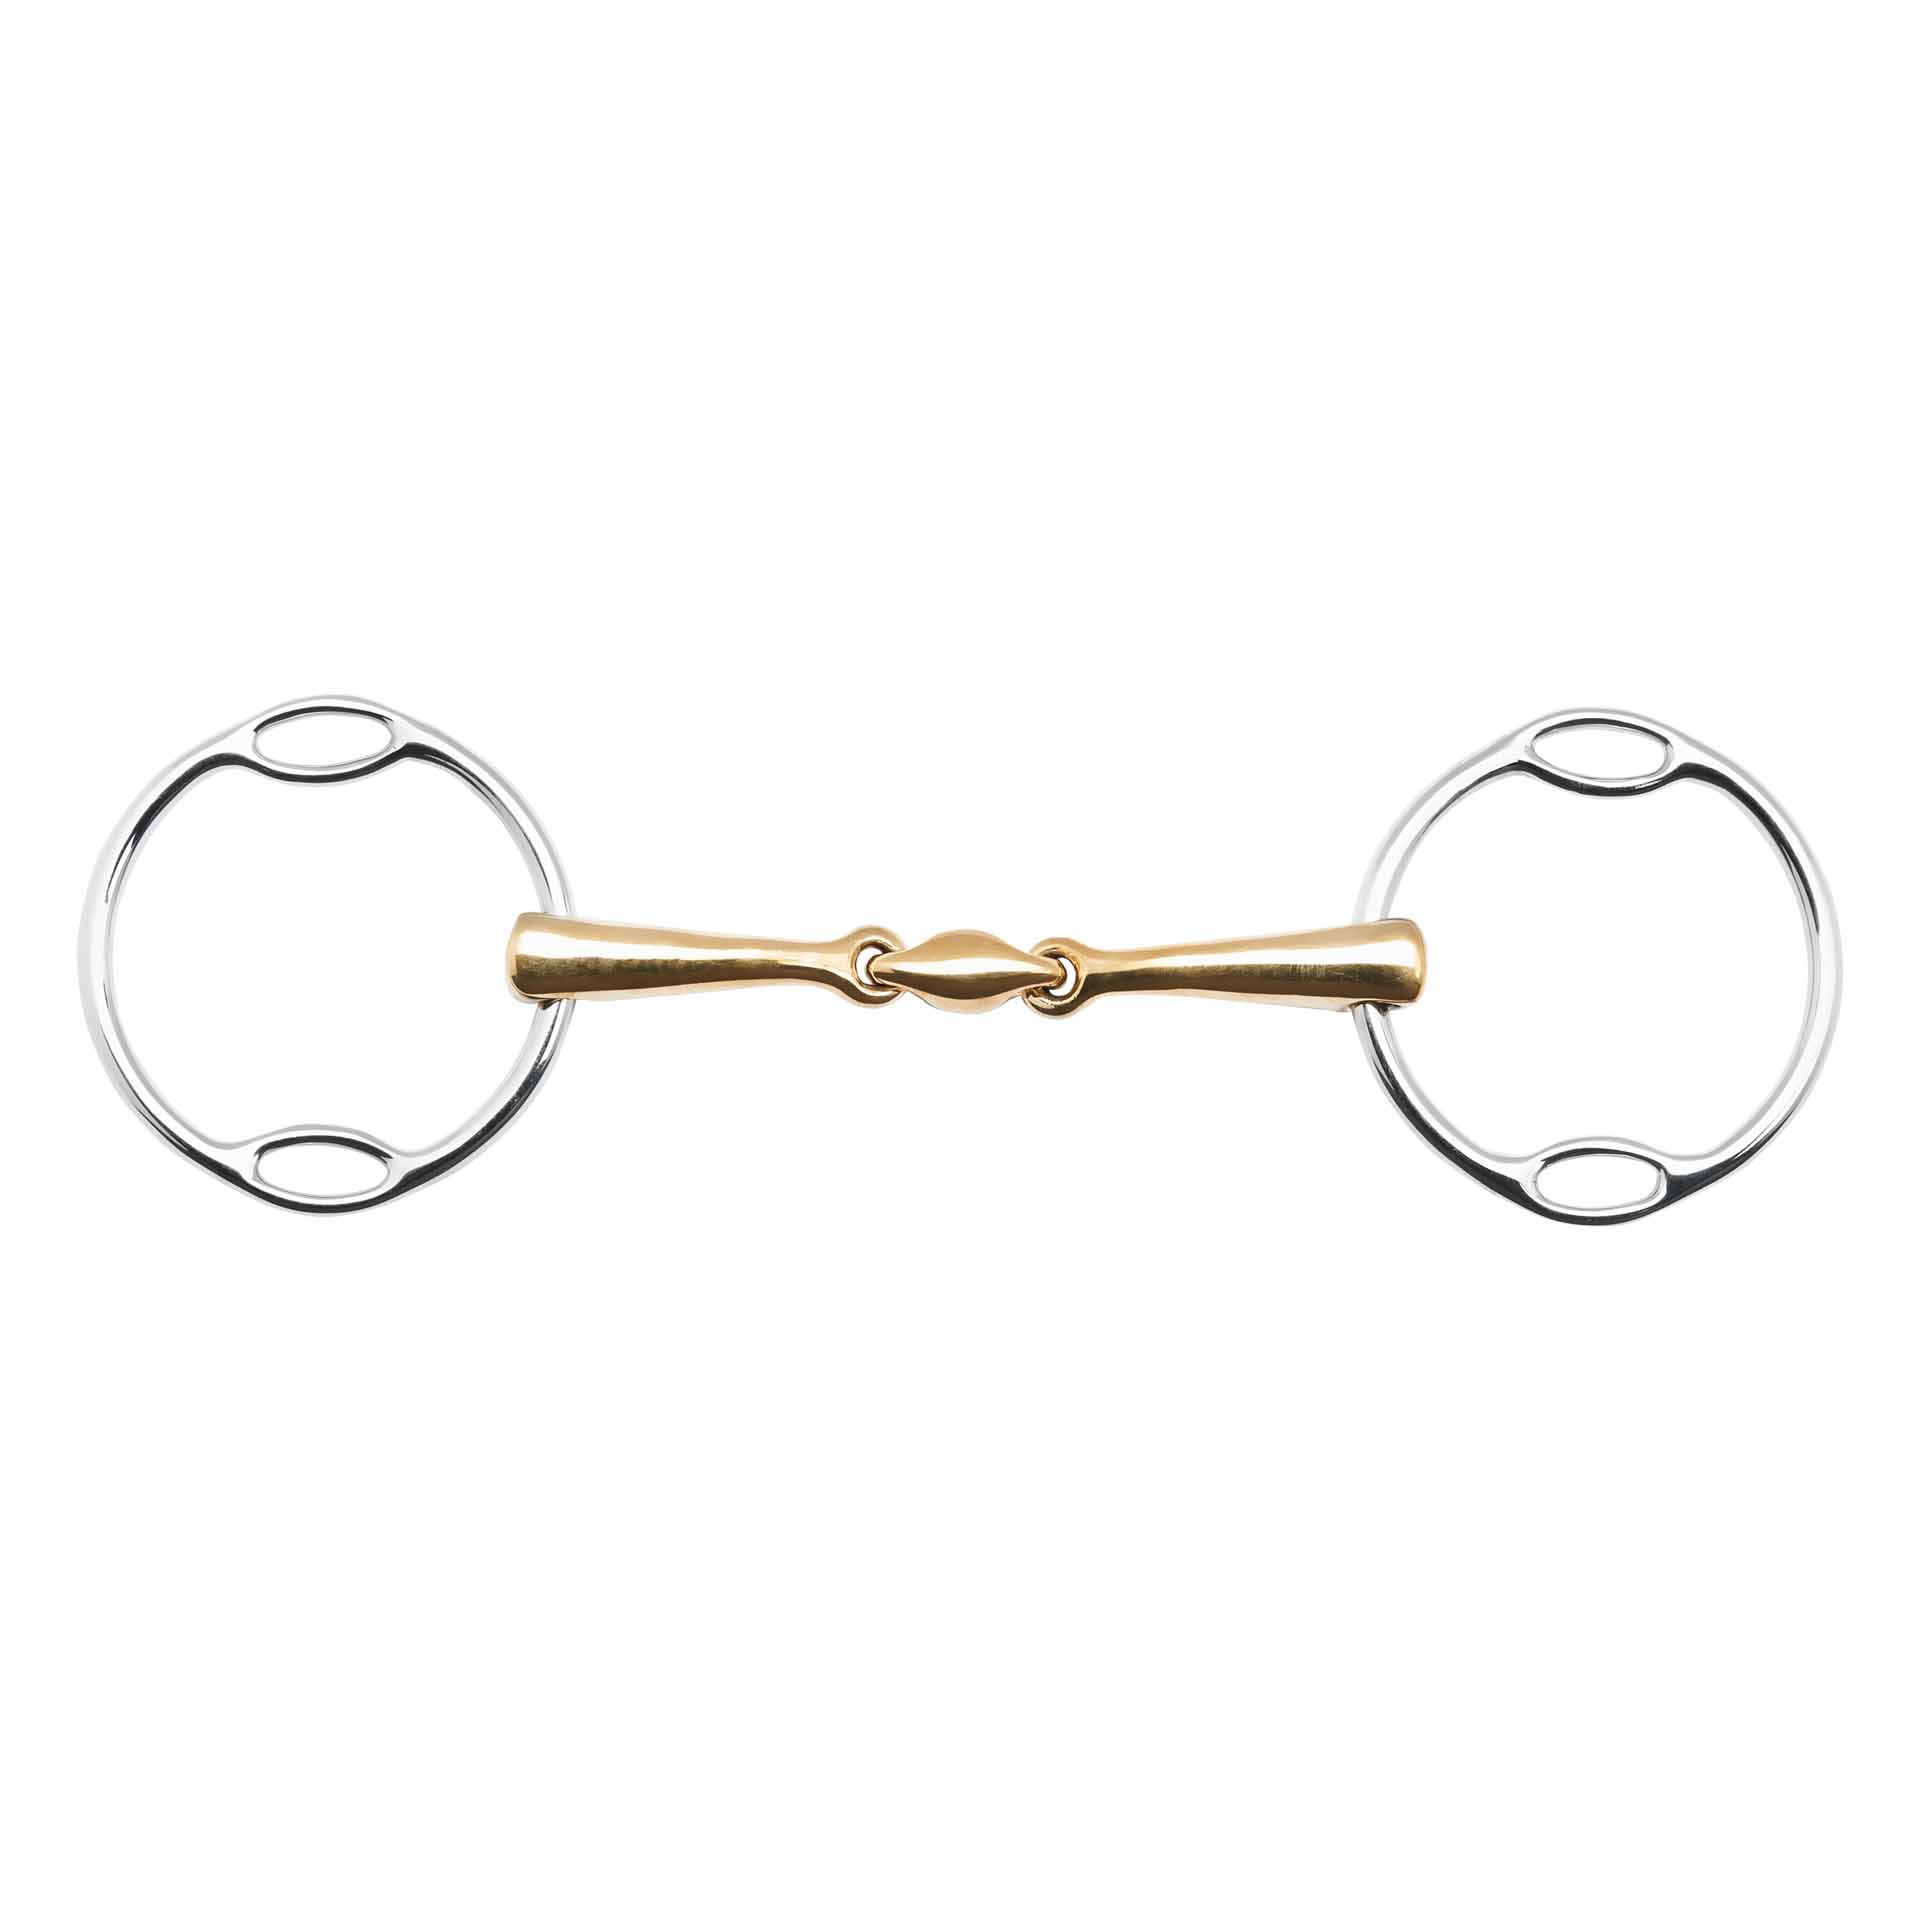 BUSSE Soft-Ring-Snaffle Bit KAUGAN®-SHAPED, 16 mm, French-Link 12.5 cm/70 mm 